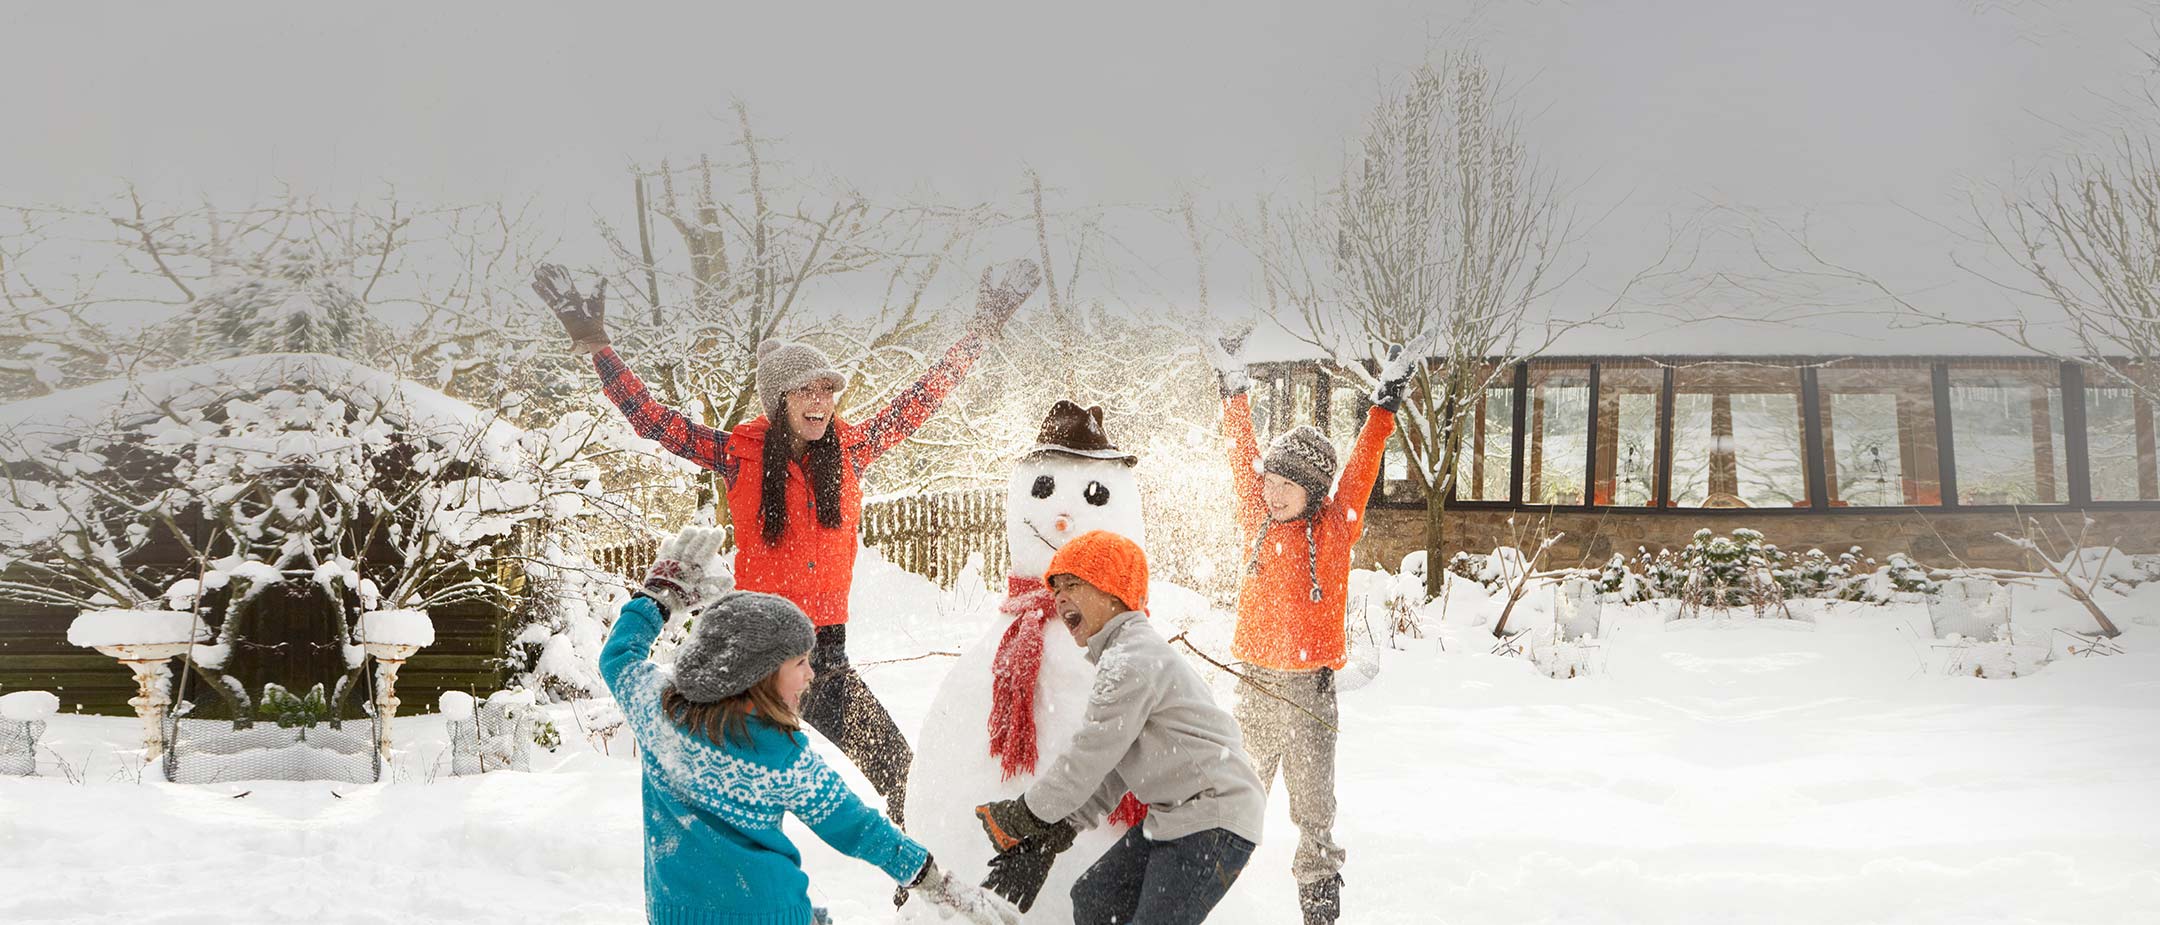 Kids playing next to a snowman